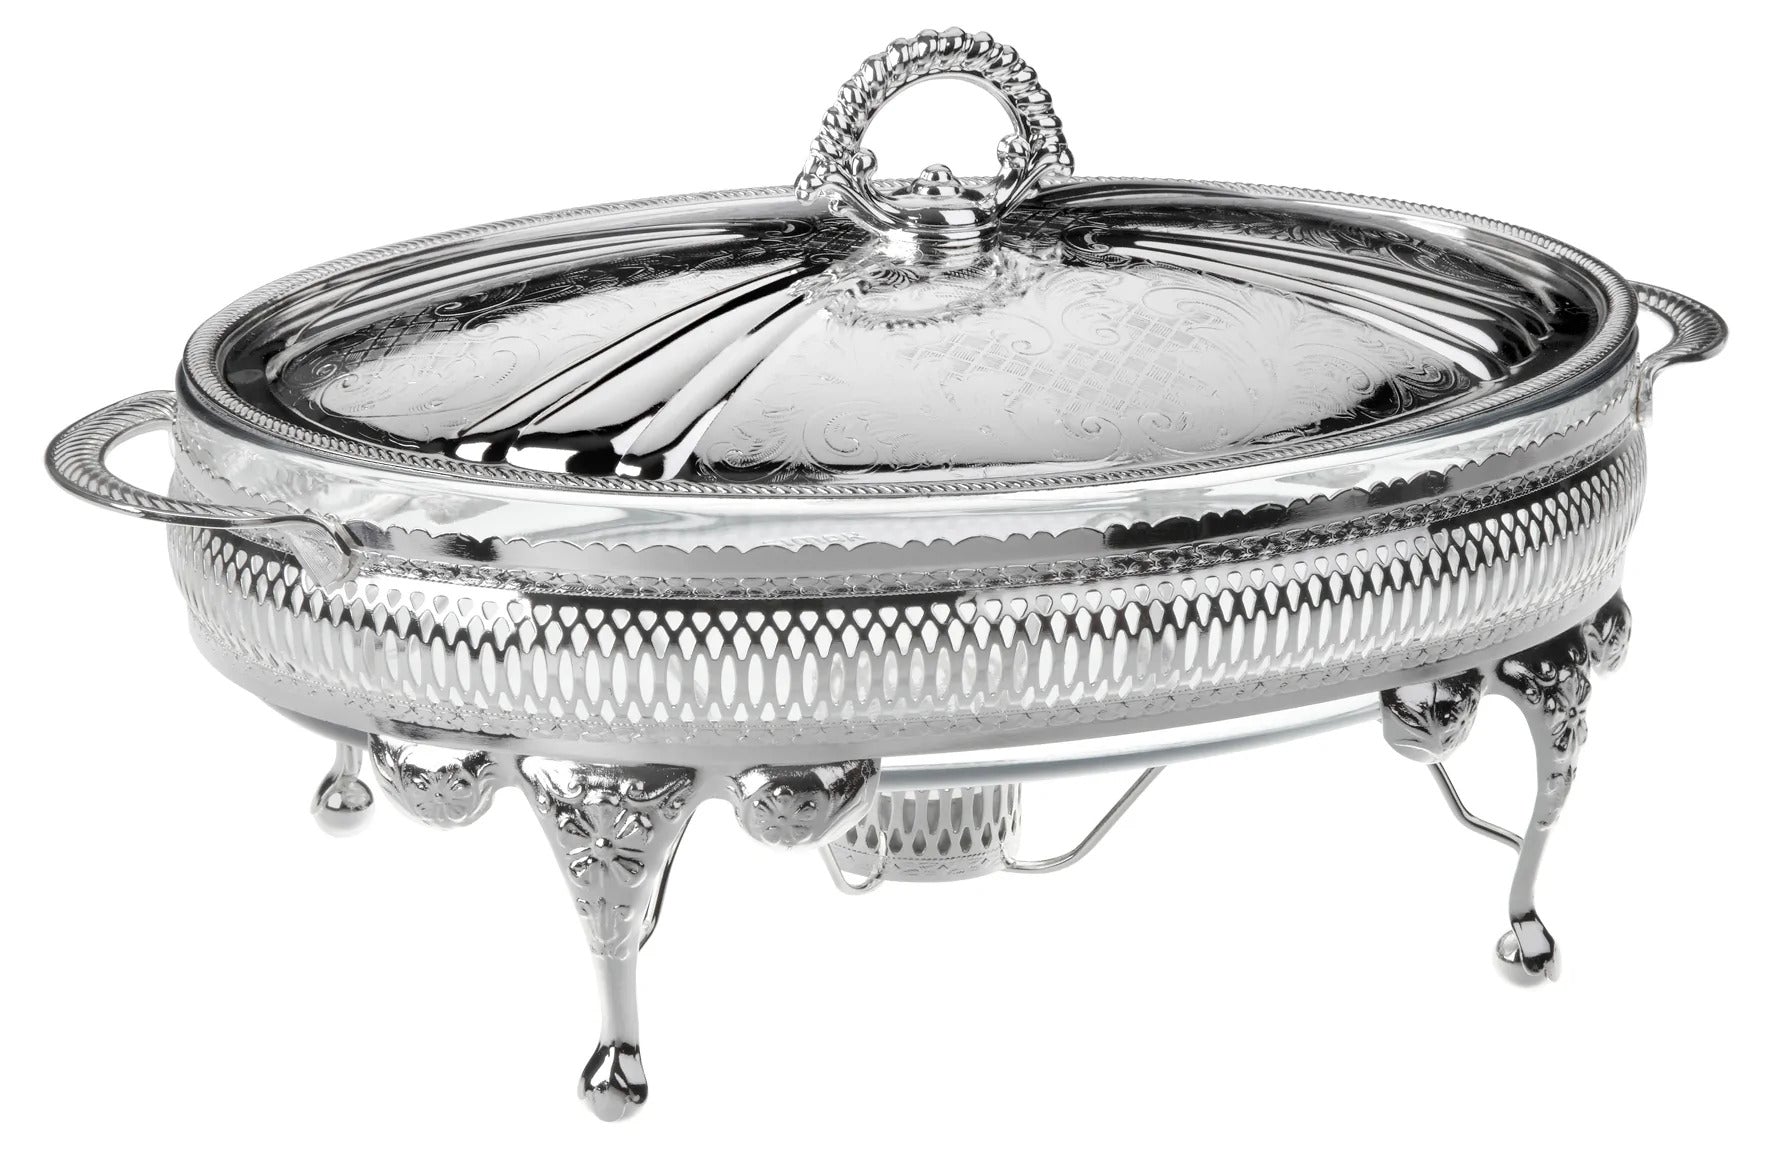 Queen Anne Casserole Oval with cover and Warmer, Silver plated - Made in England - Royal Gift